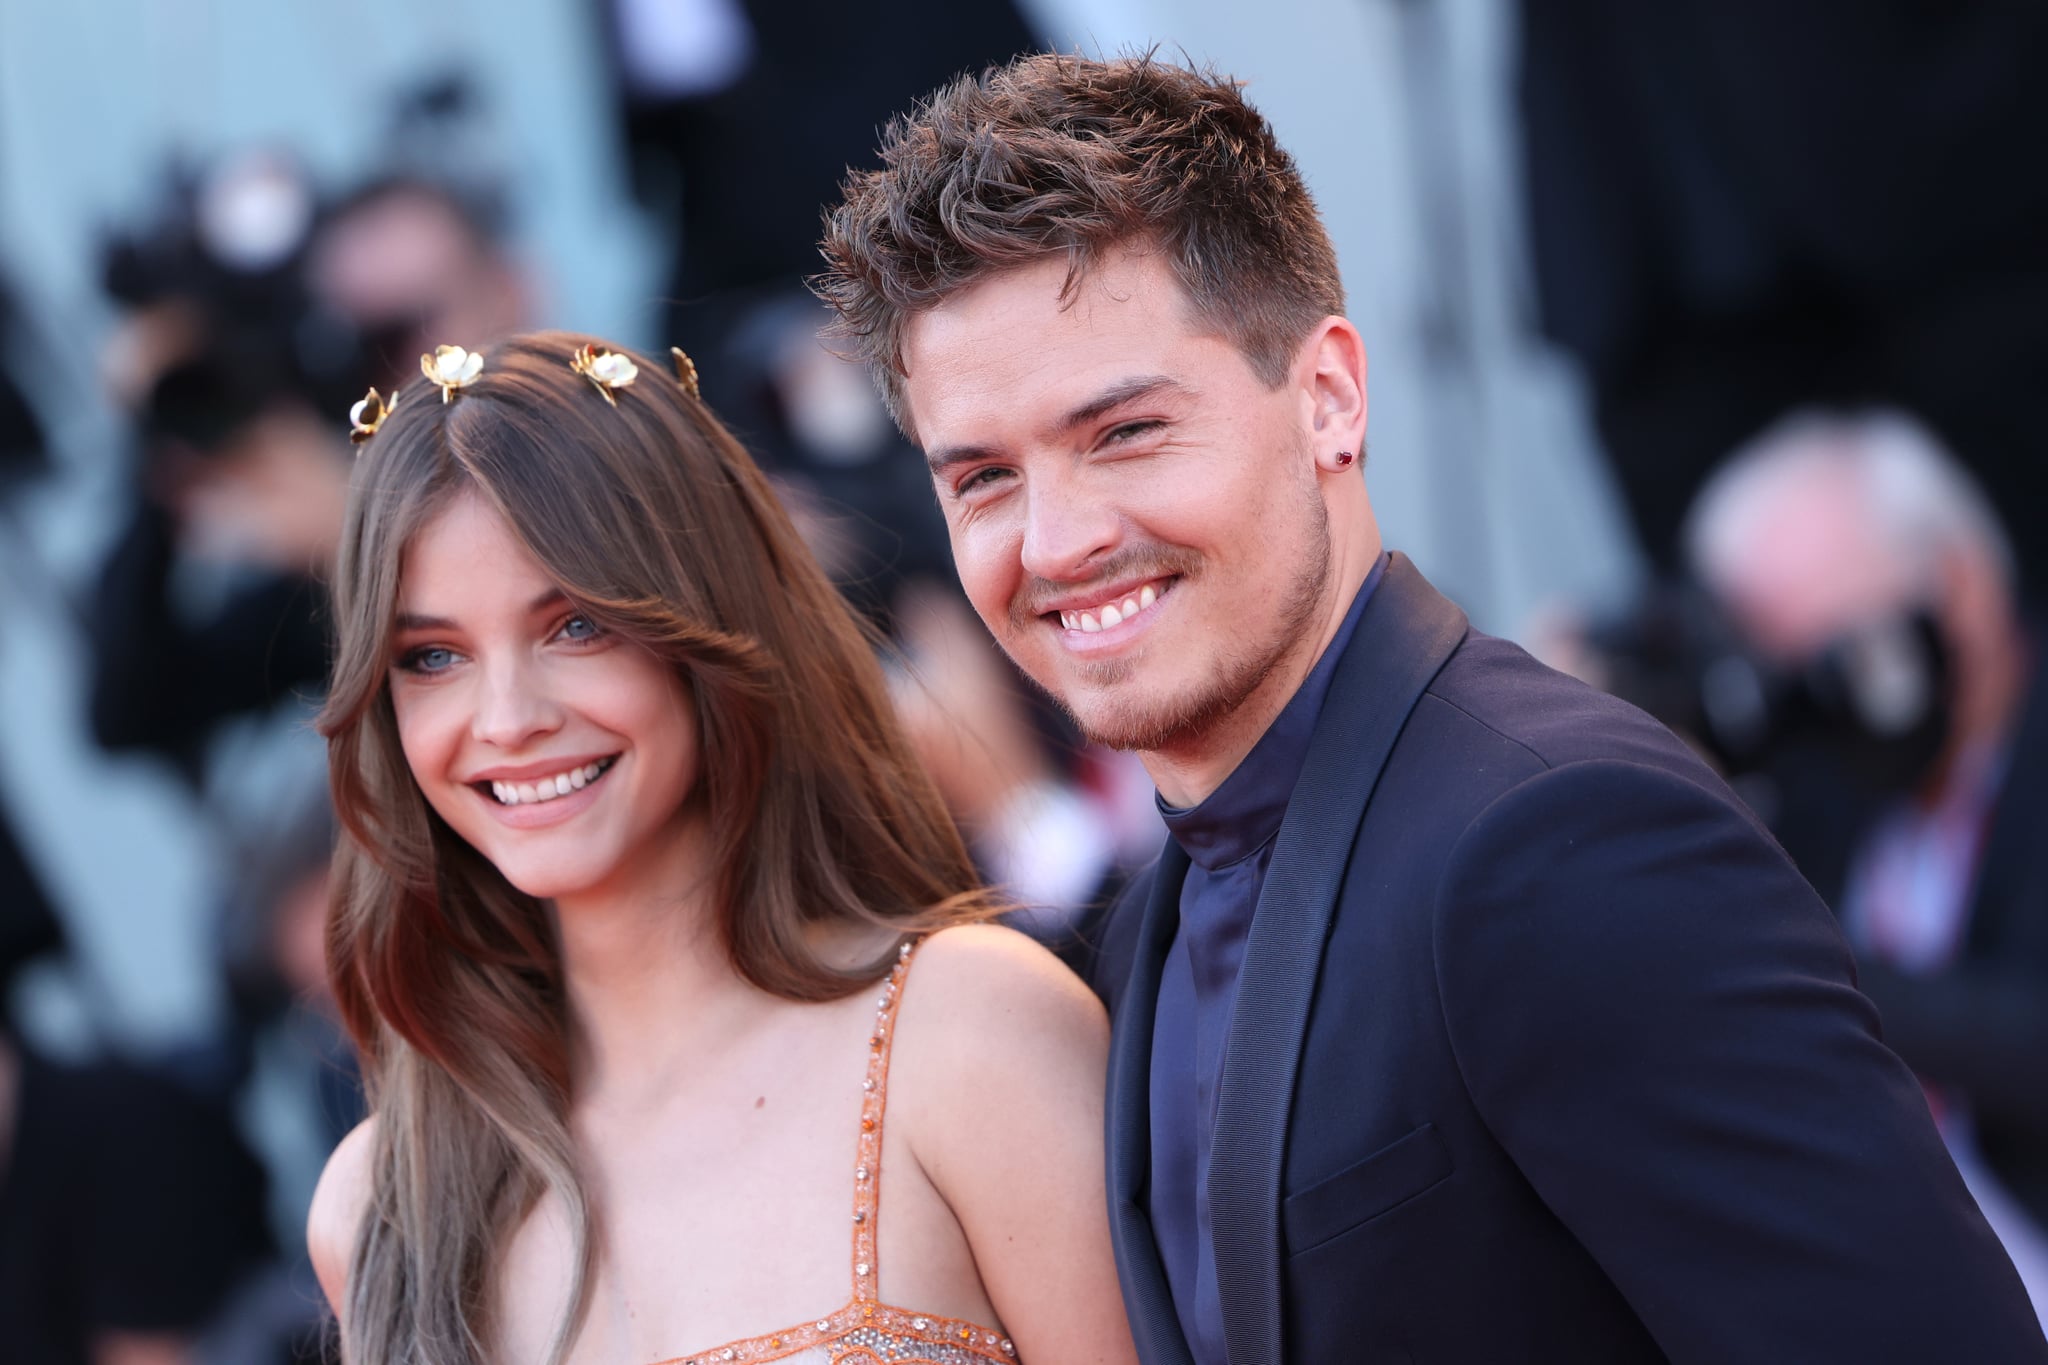 Barbara Palvin and Dylan Sprouse at the Venice Film Festival